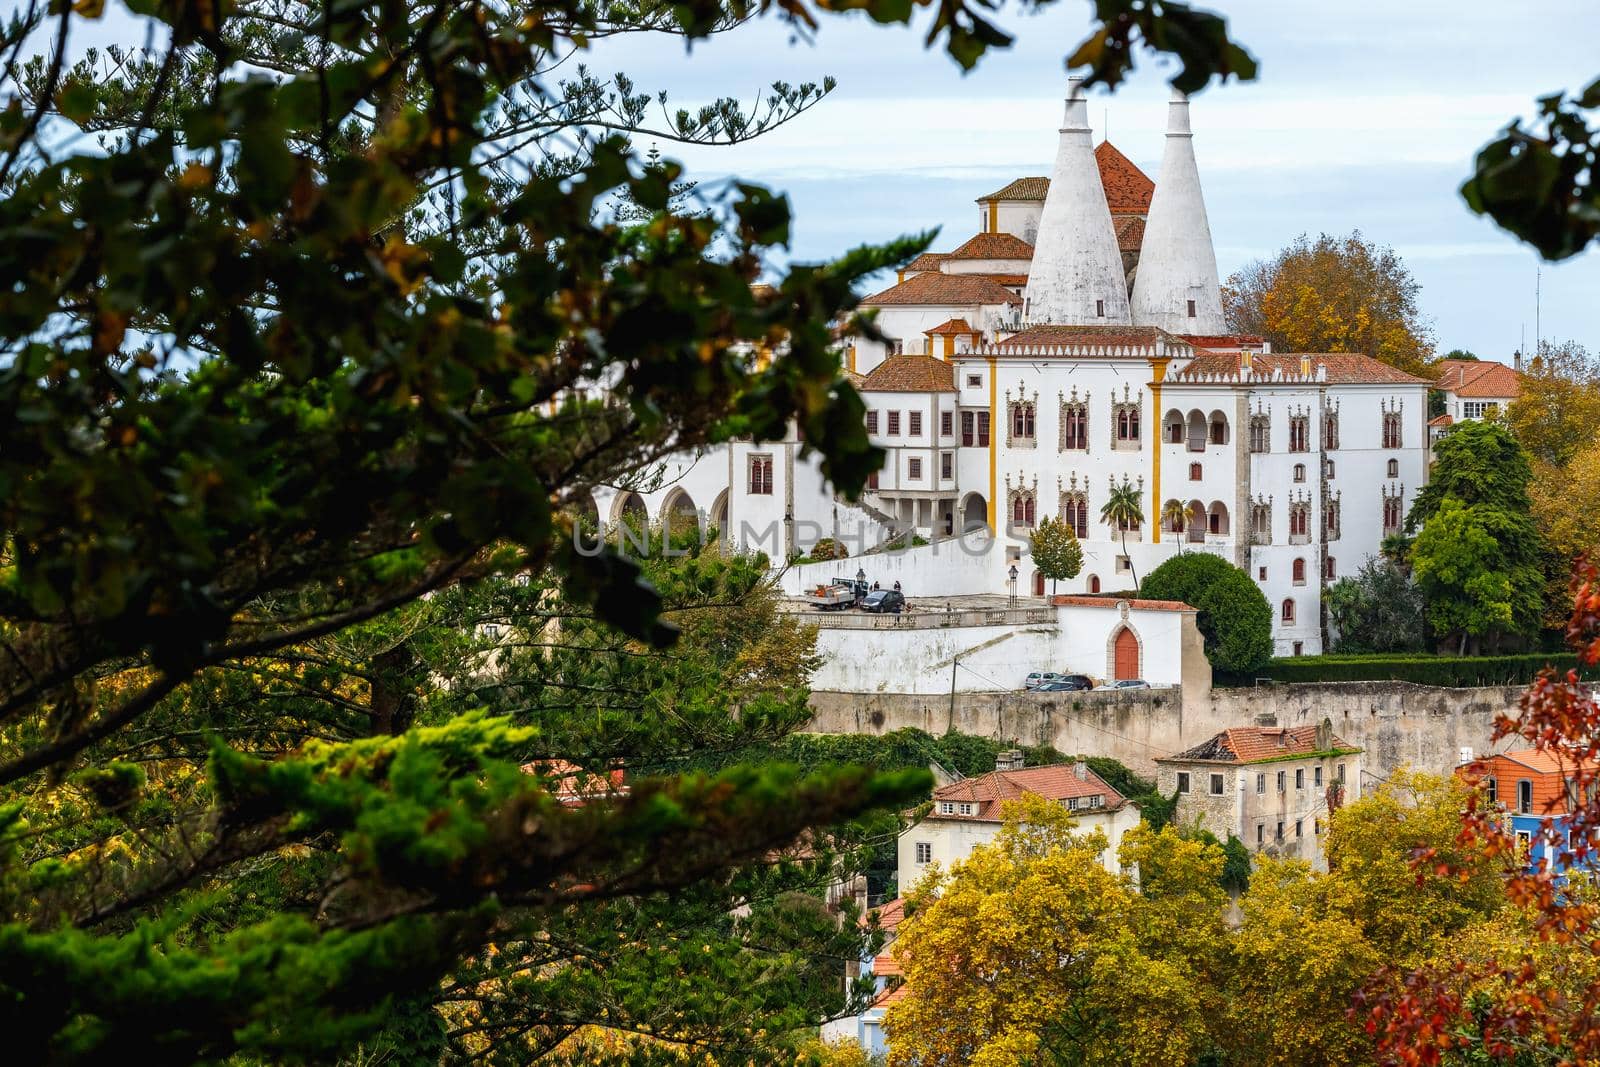 Sintra, Portugal - October 28, 2020: Architectural detail of the National Palace of Sintra, also called the Royal Palace with its 2 chimneys of 33 meters behind trees on a winter day